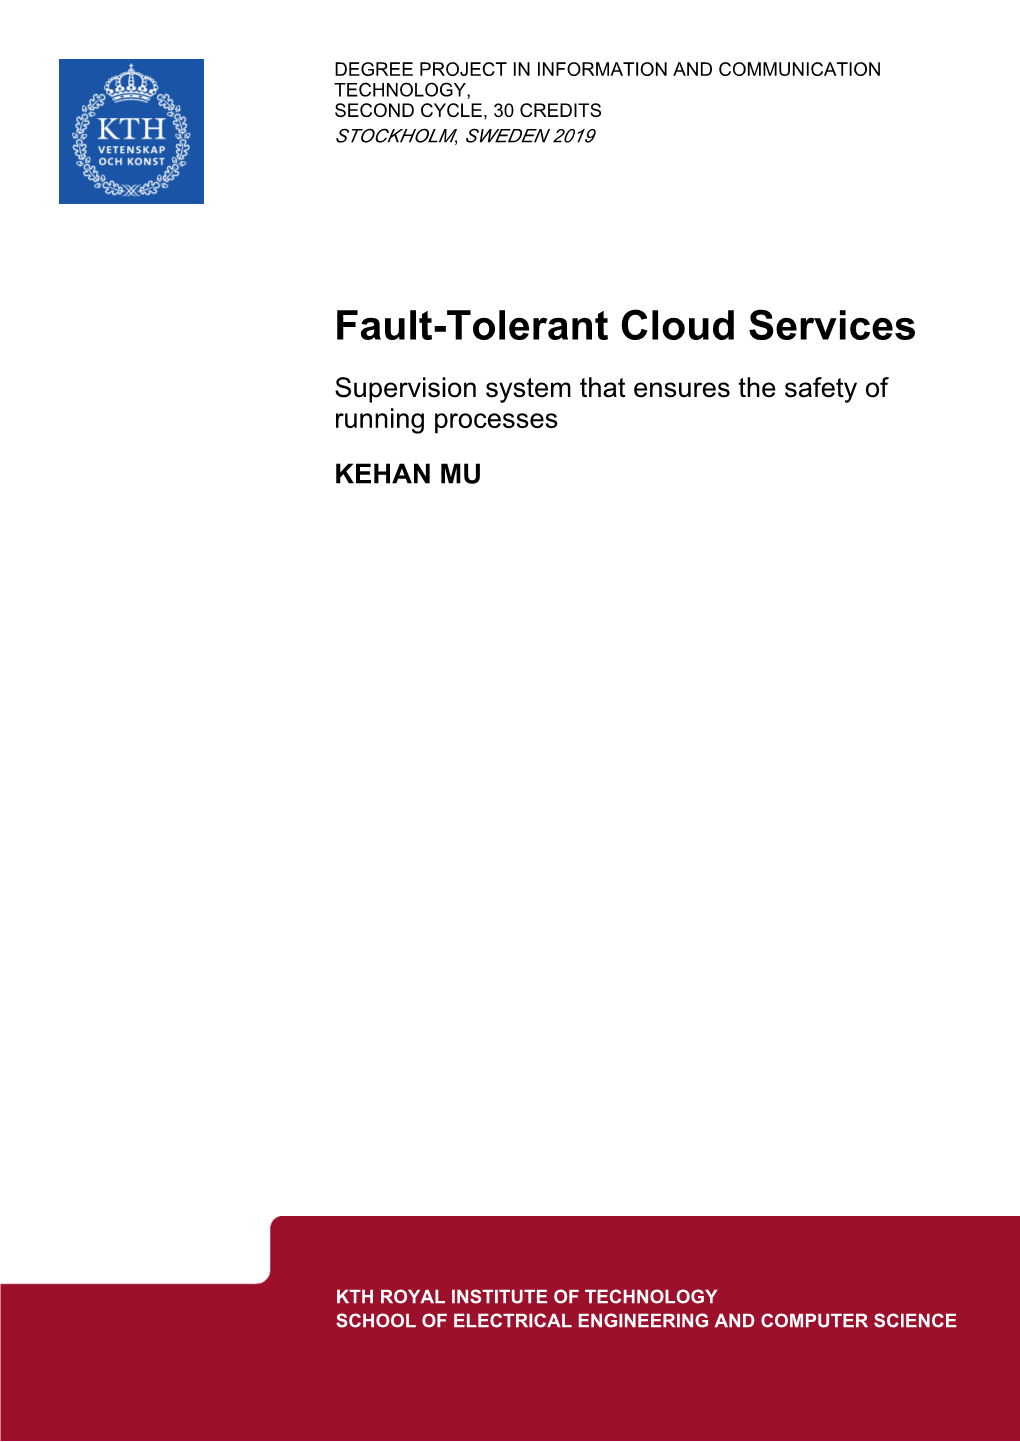 Fault-Tolerant Cloud Services Supervision System That Ensures the Safety of Running Processes